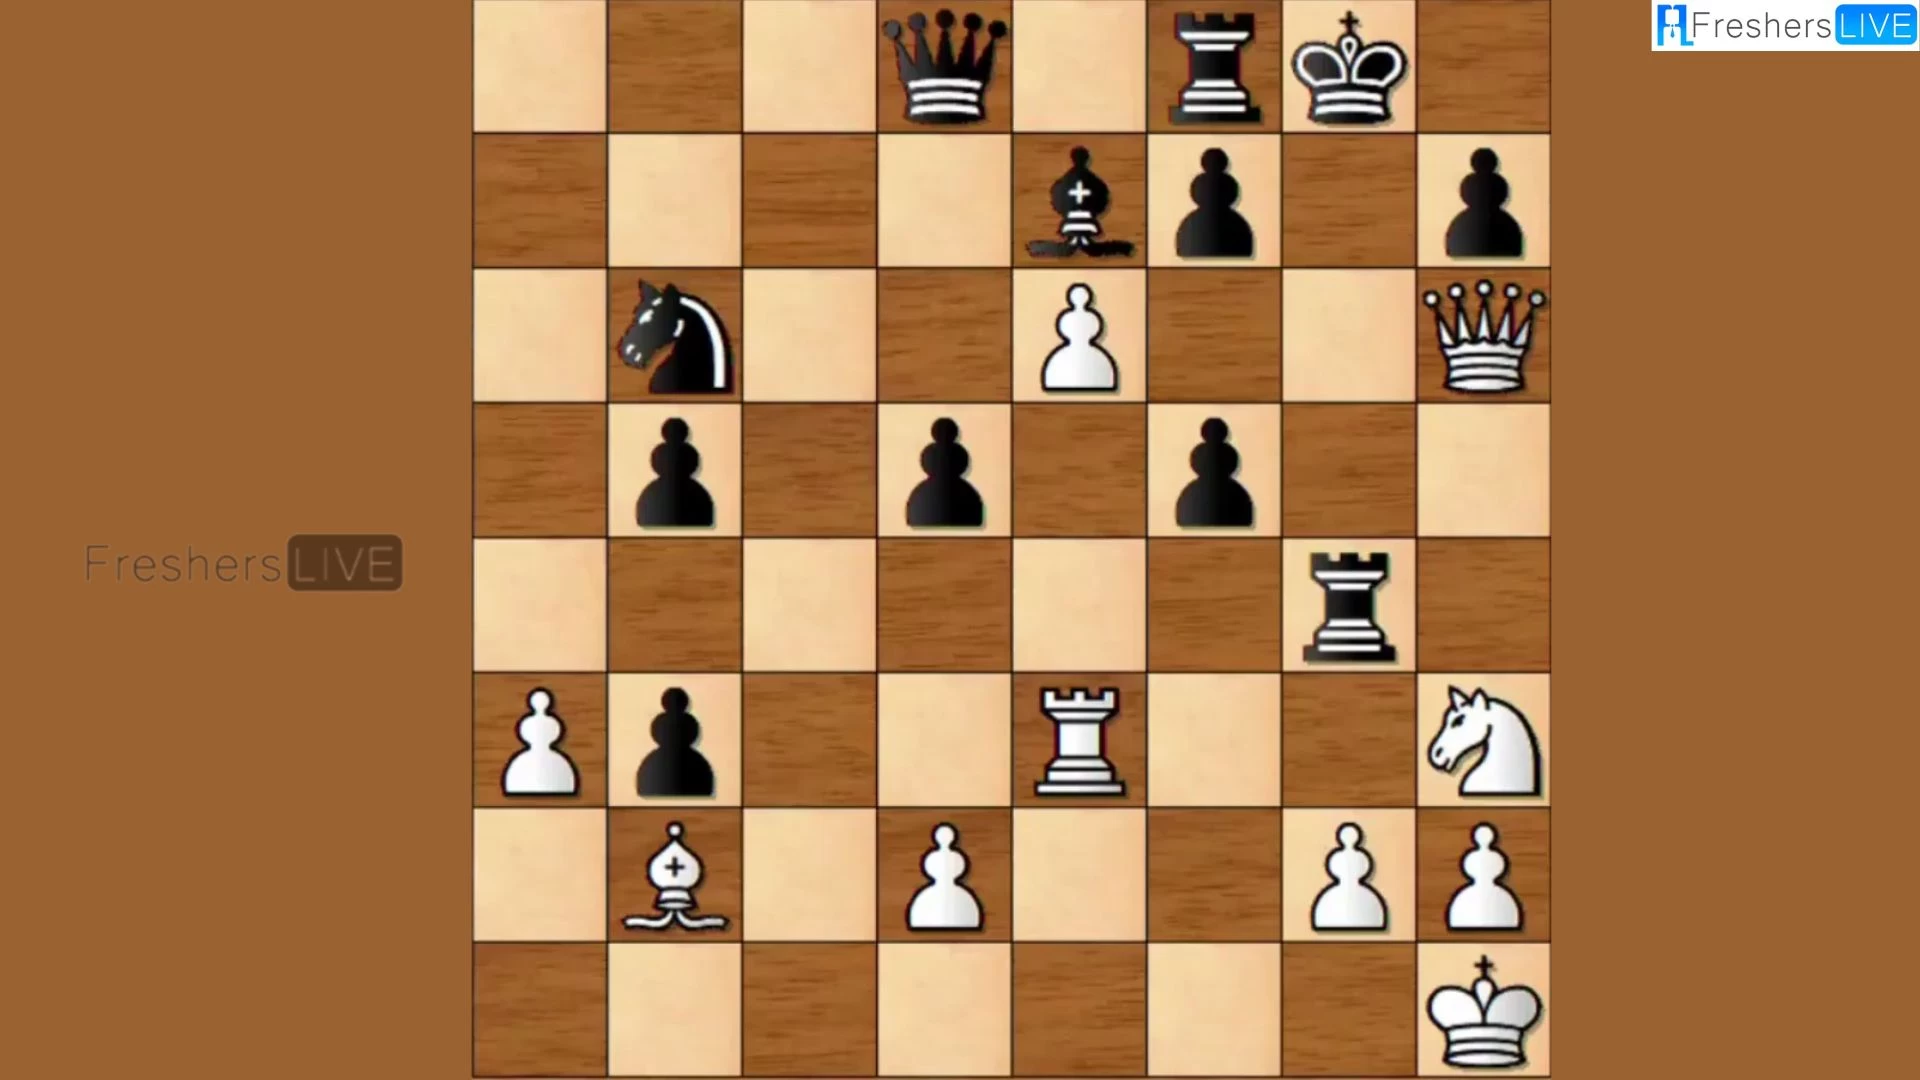 Can You Solve This Chess Puzzle With Only Four White Moves?